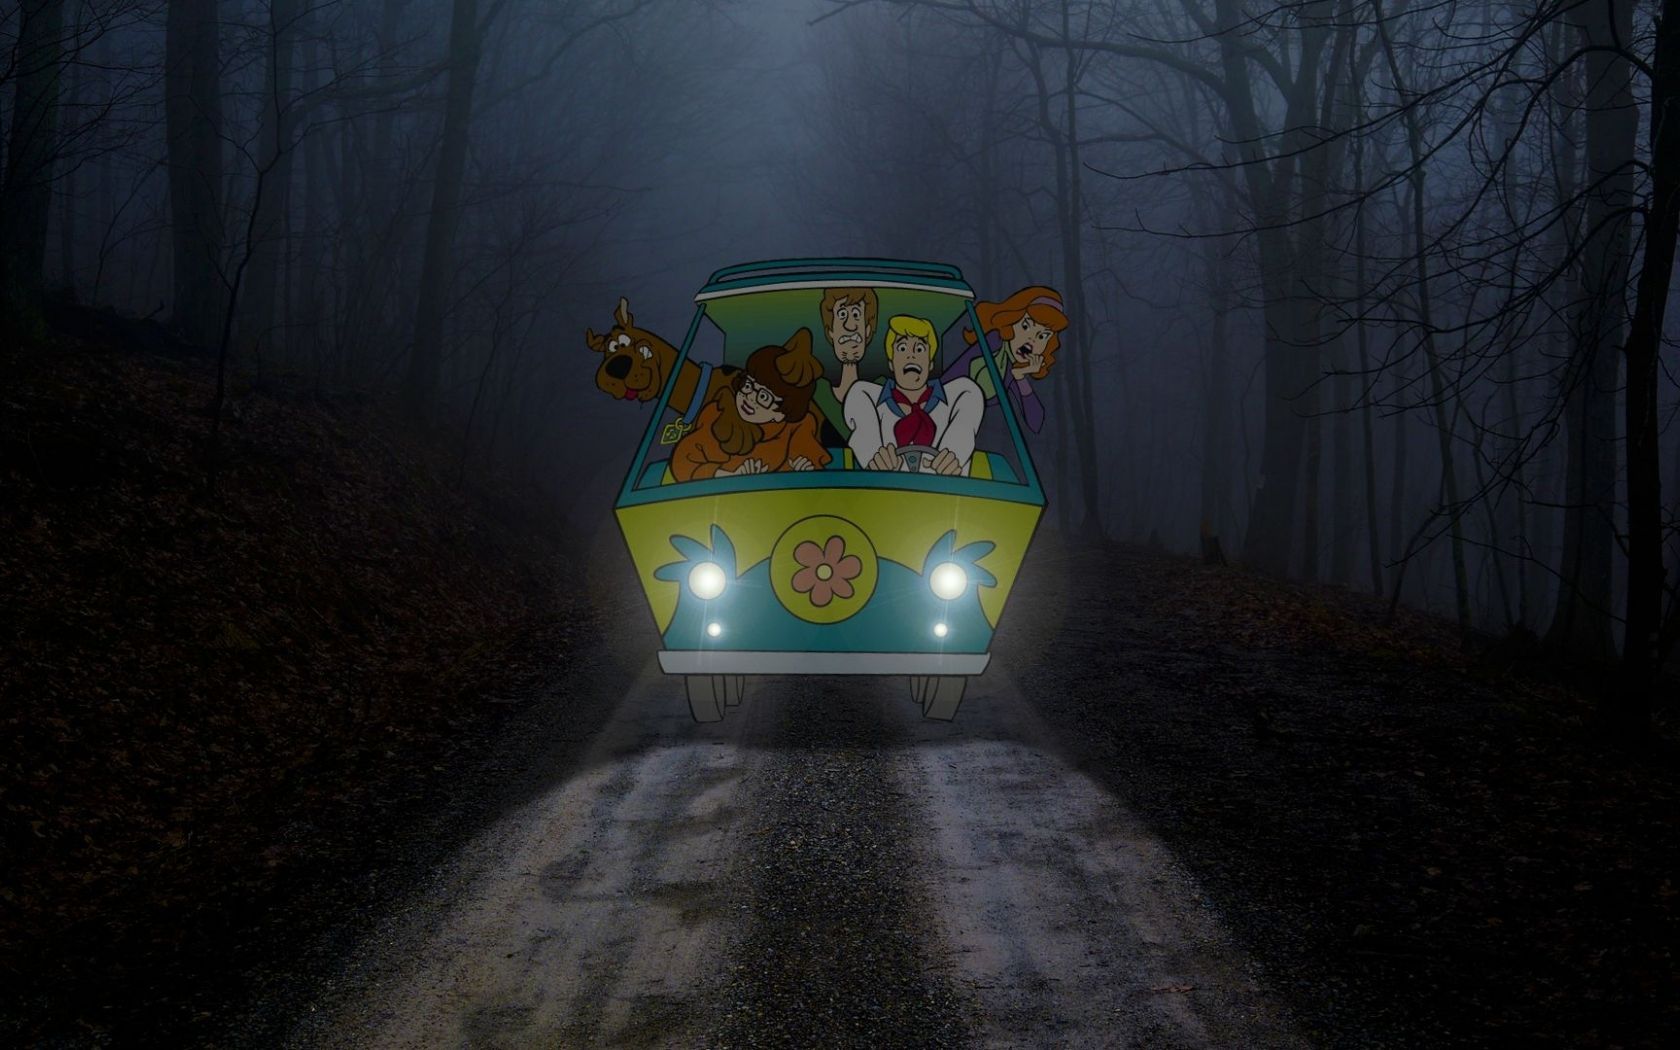 Free Download Scoo Doo Gang Wallpaper Mystery Machine Van for Scooby Doo Mystery Machine Wallpaper. Scooby doo, Mystery machine van, Cartoon wallpaper